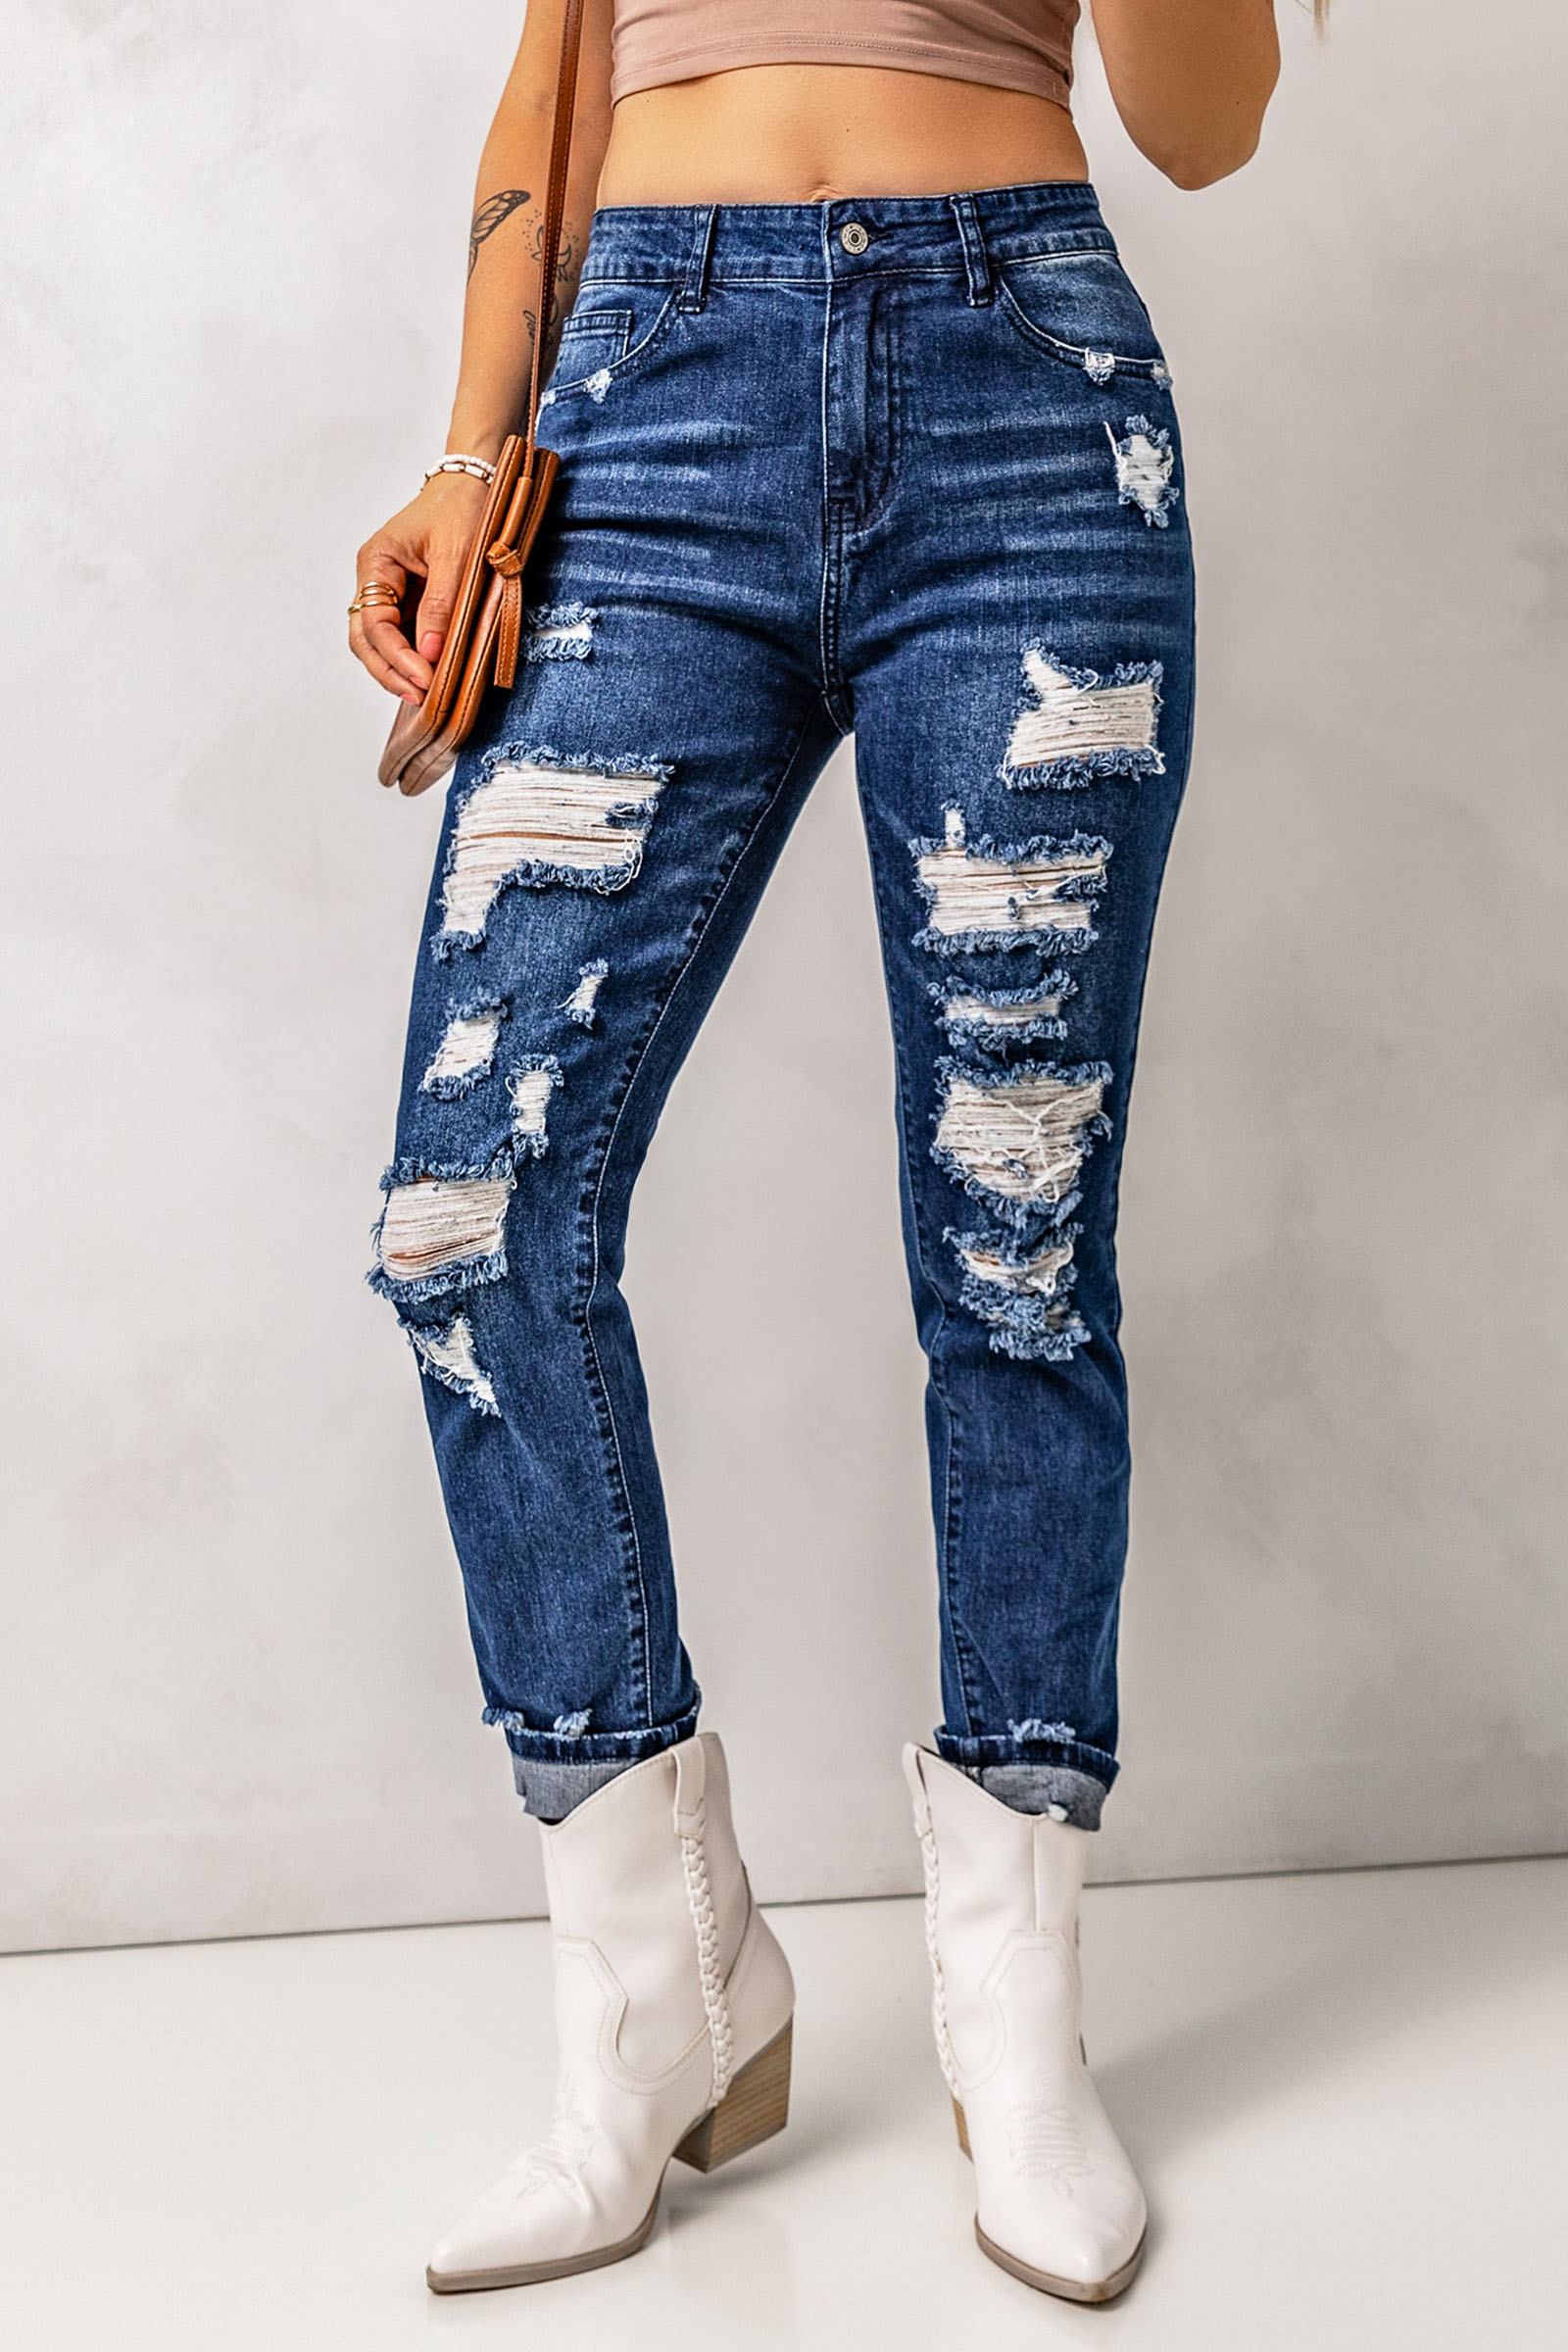 Wholesale Dark Blue Distressed Ripped High Waisted SKINNY JEANS